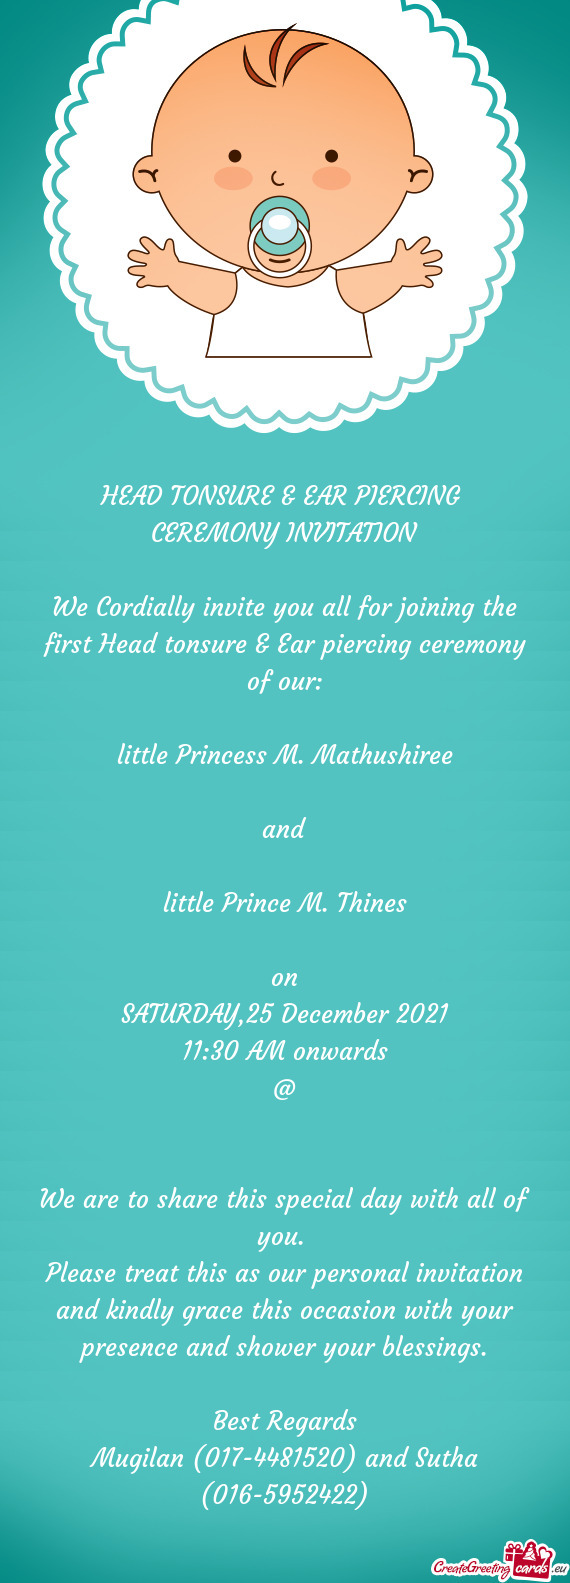 We Cordially invite you all for joining the first Head tonsure & Ear piercing ceremony of our: